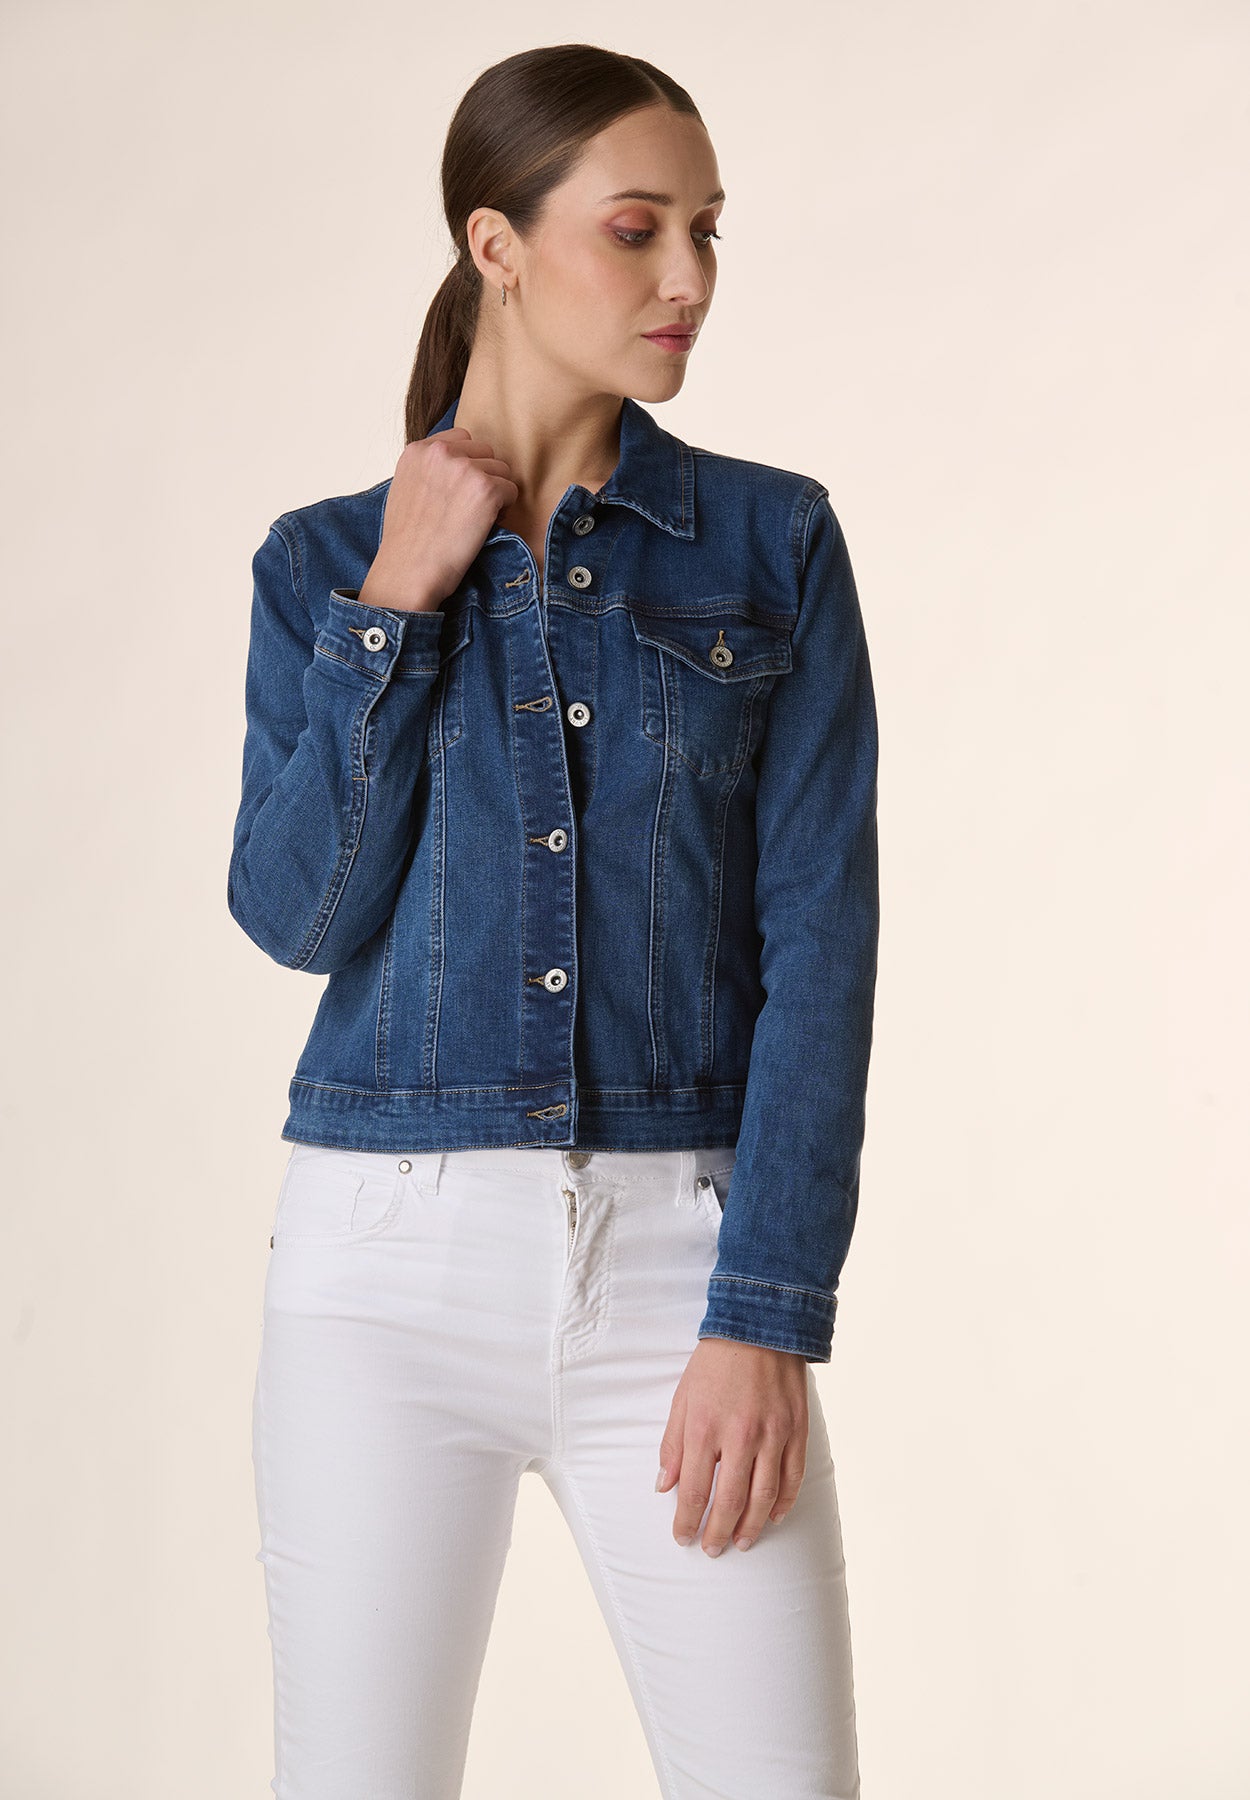 Jeans jacket with short buttons